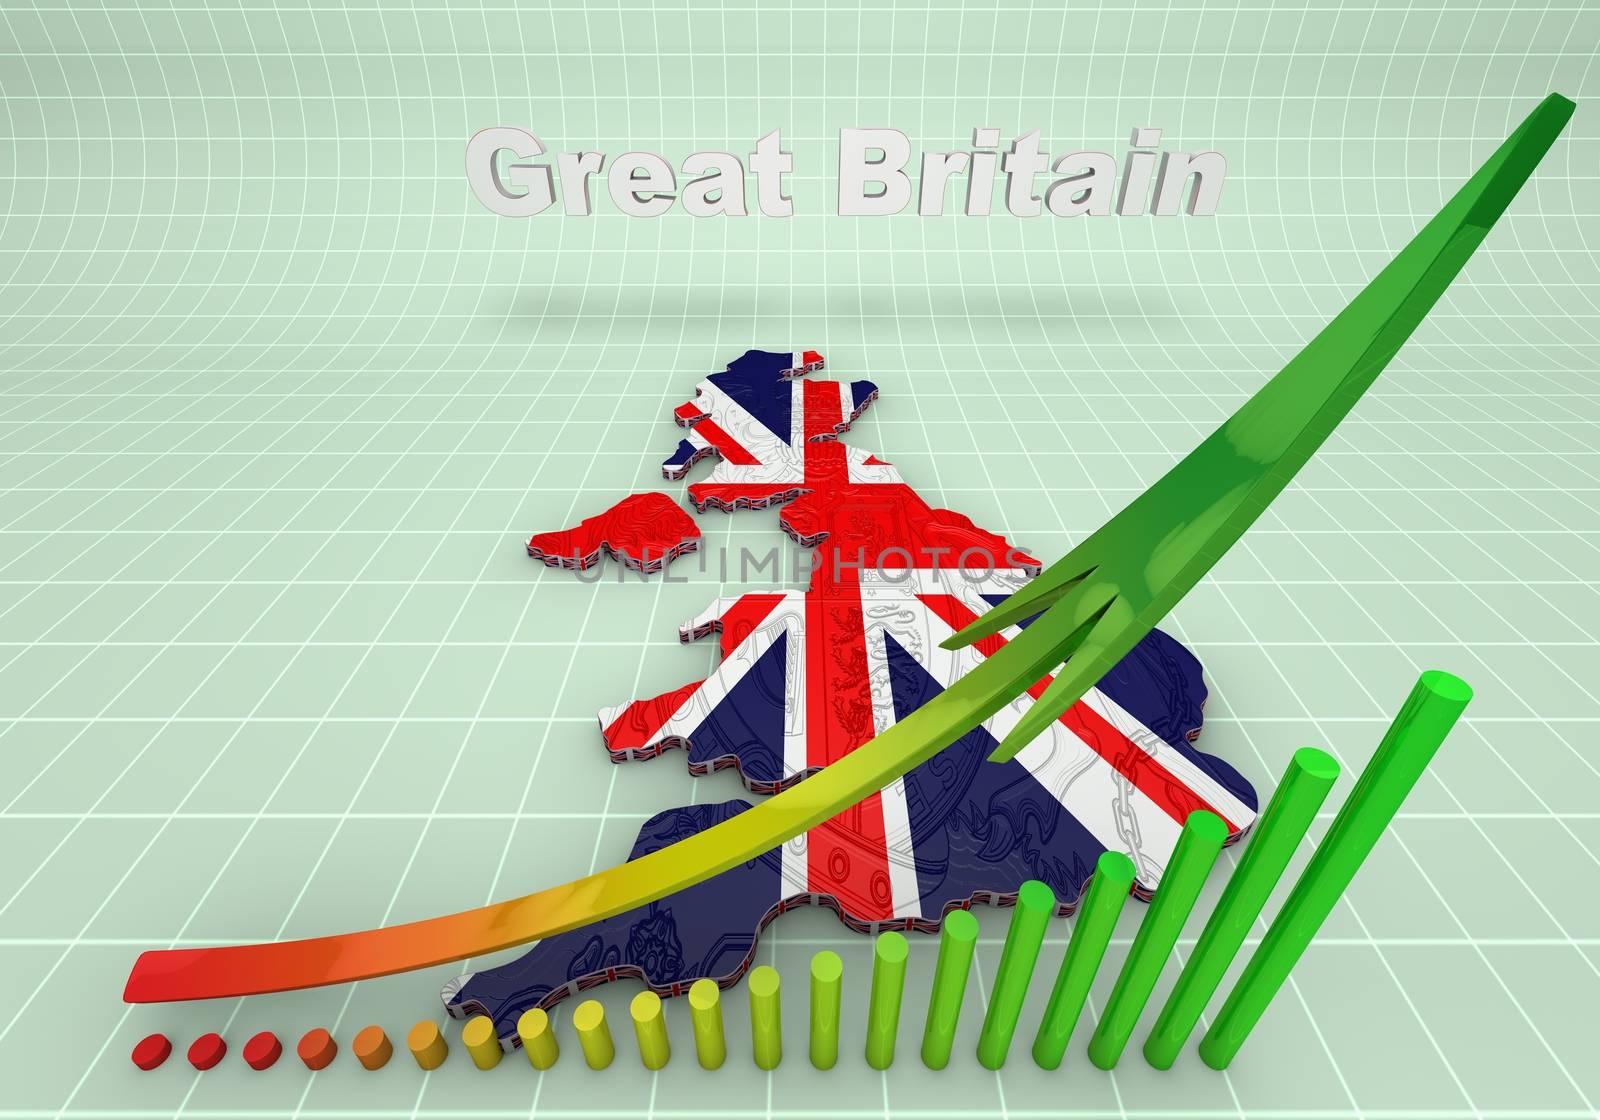 3D Illustration of United Kingdom map with as Flag